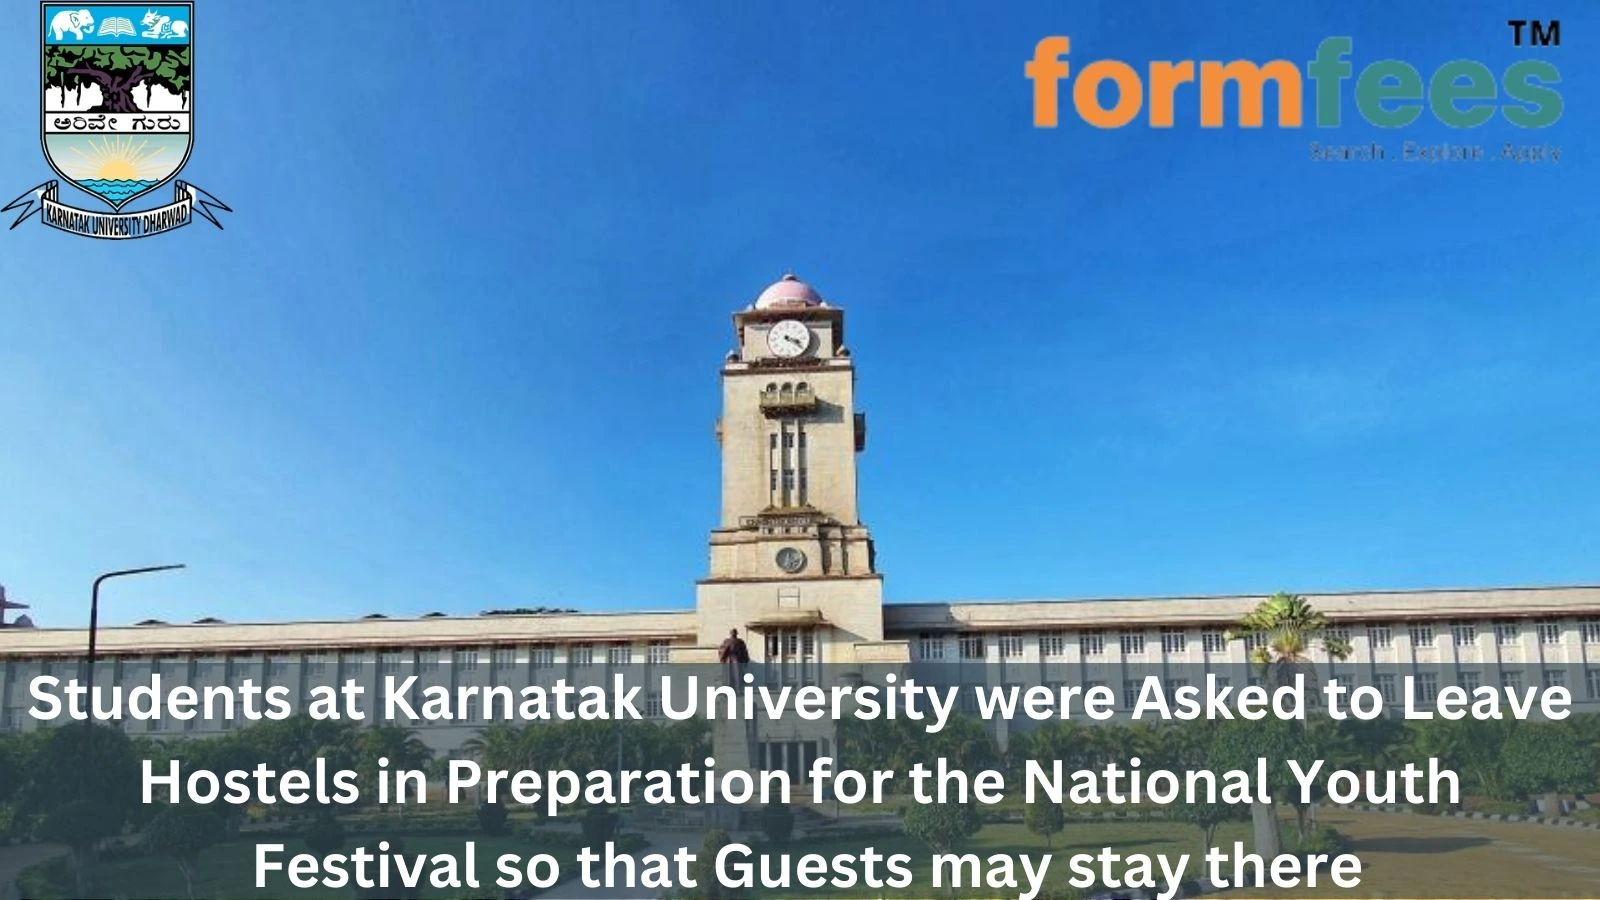 Students at Karnatak University were Asked to Leave Hostels in Preparation for the National Youth Festival so that Guests may stay there